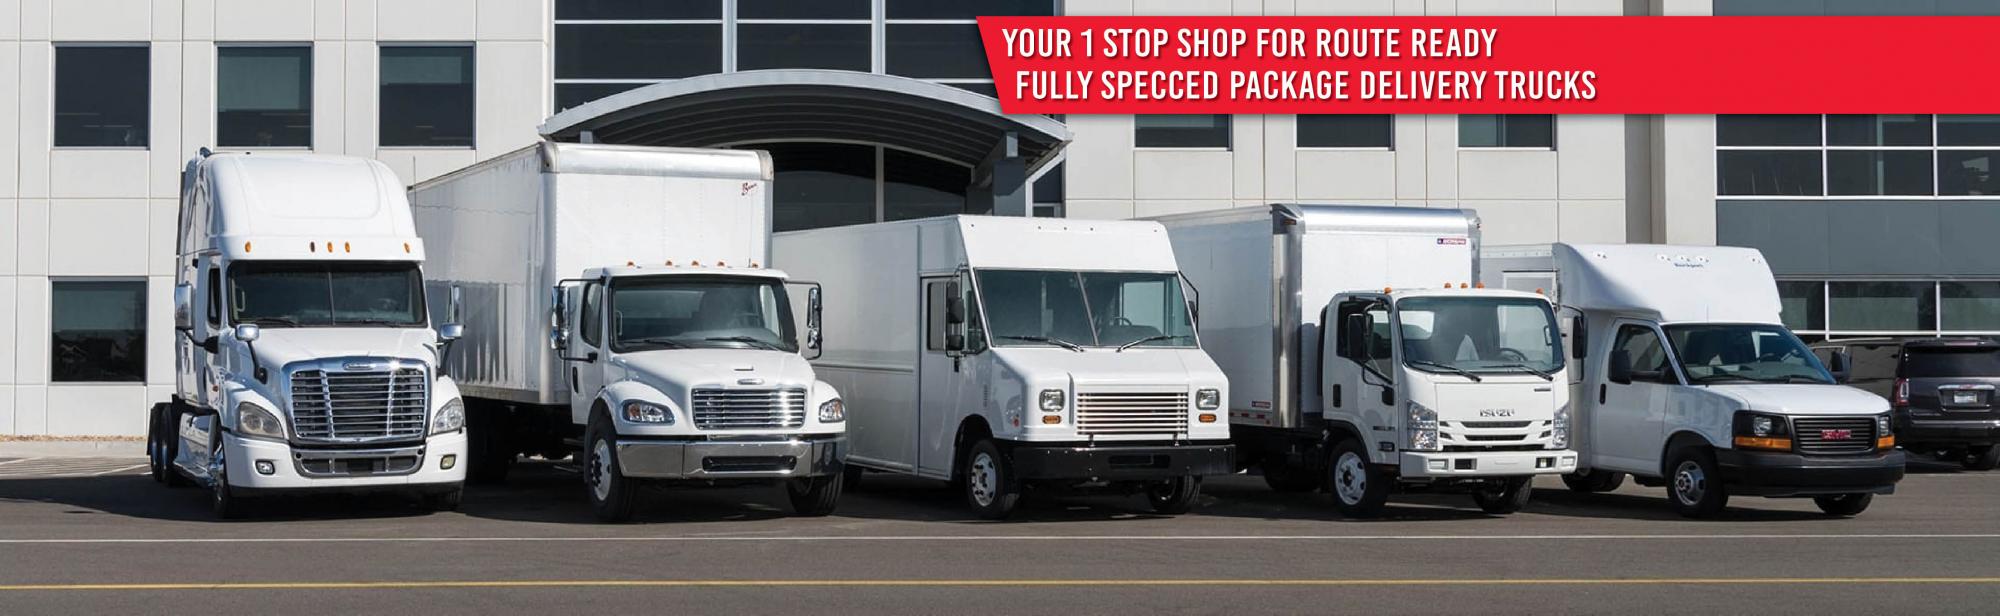 Transwest Package Delivery Trucks for Sale Colorado